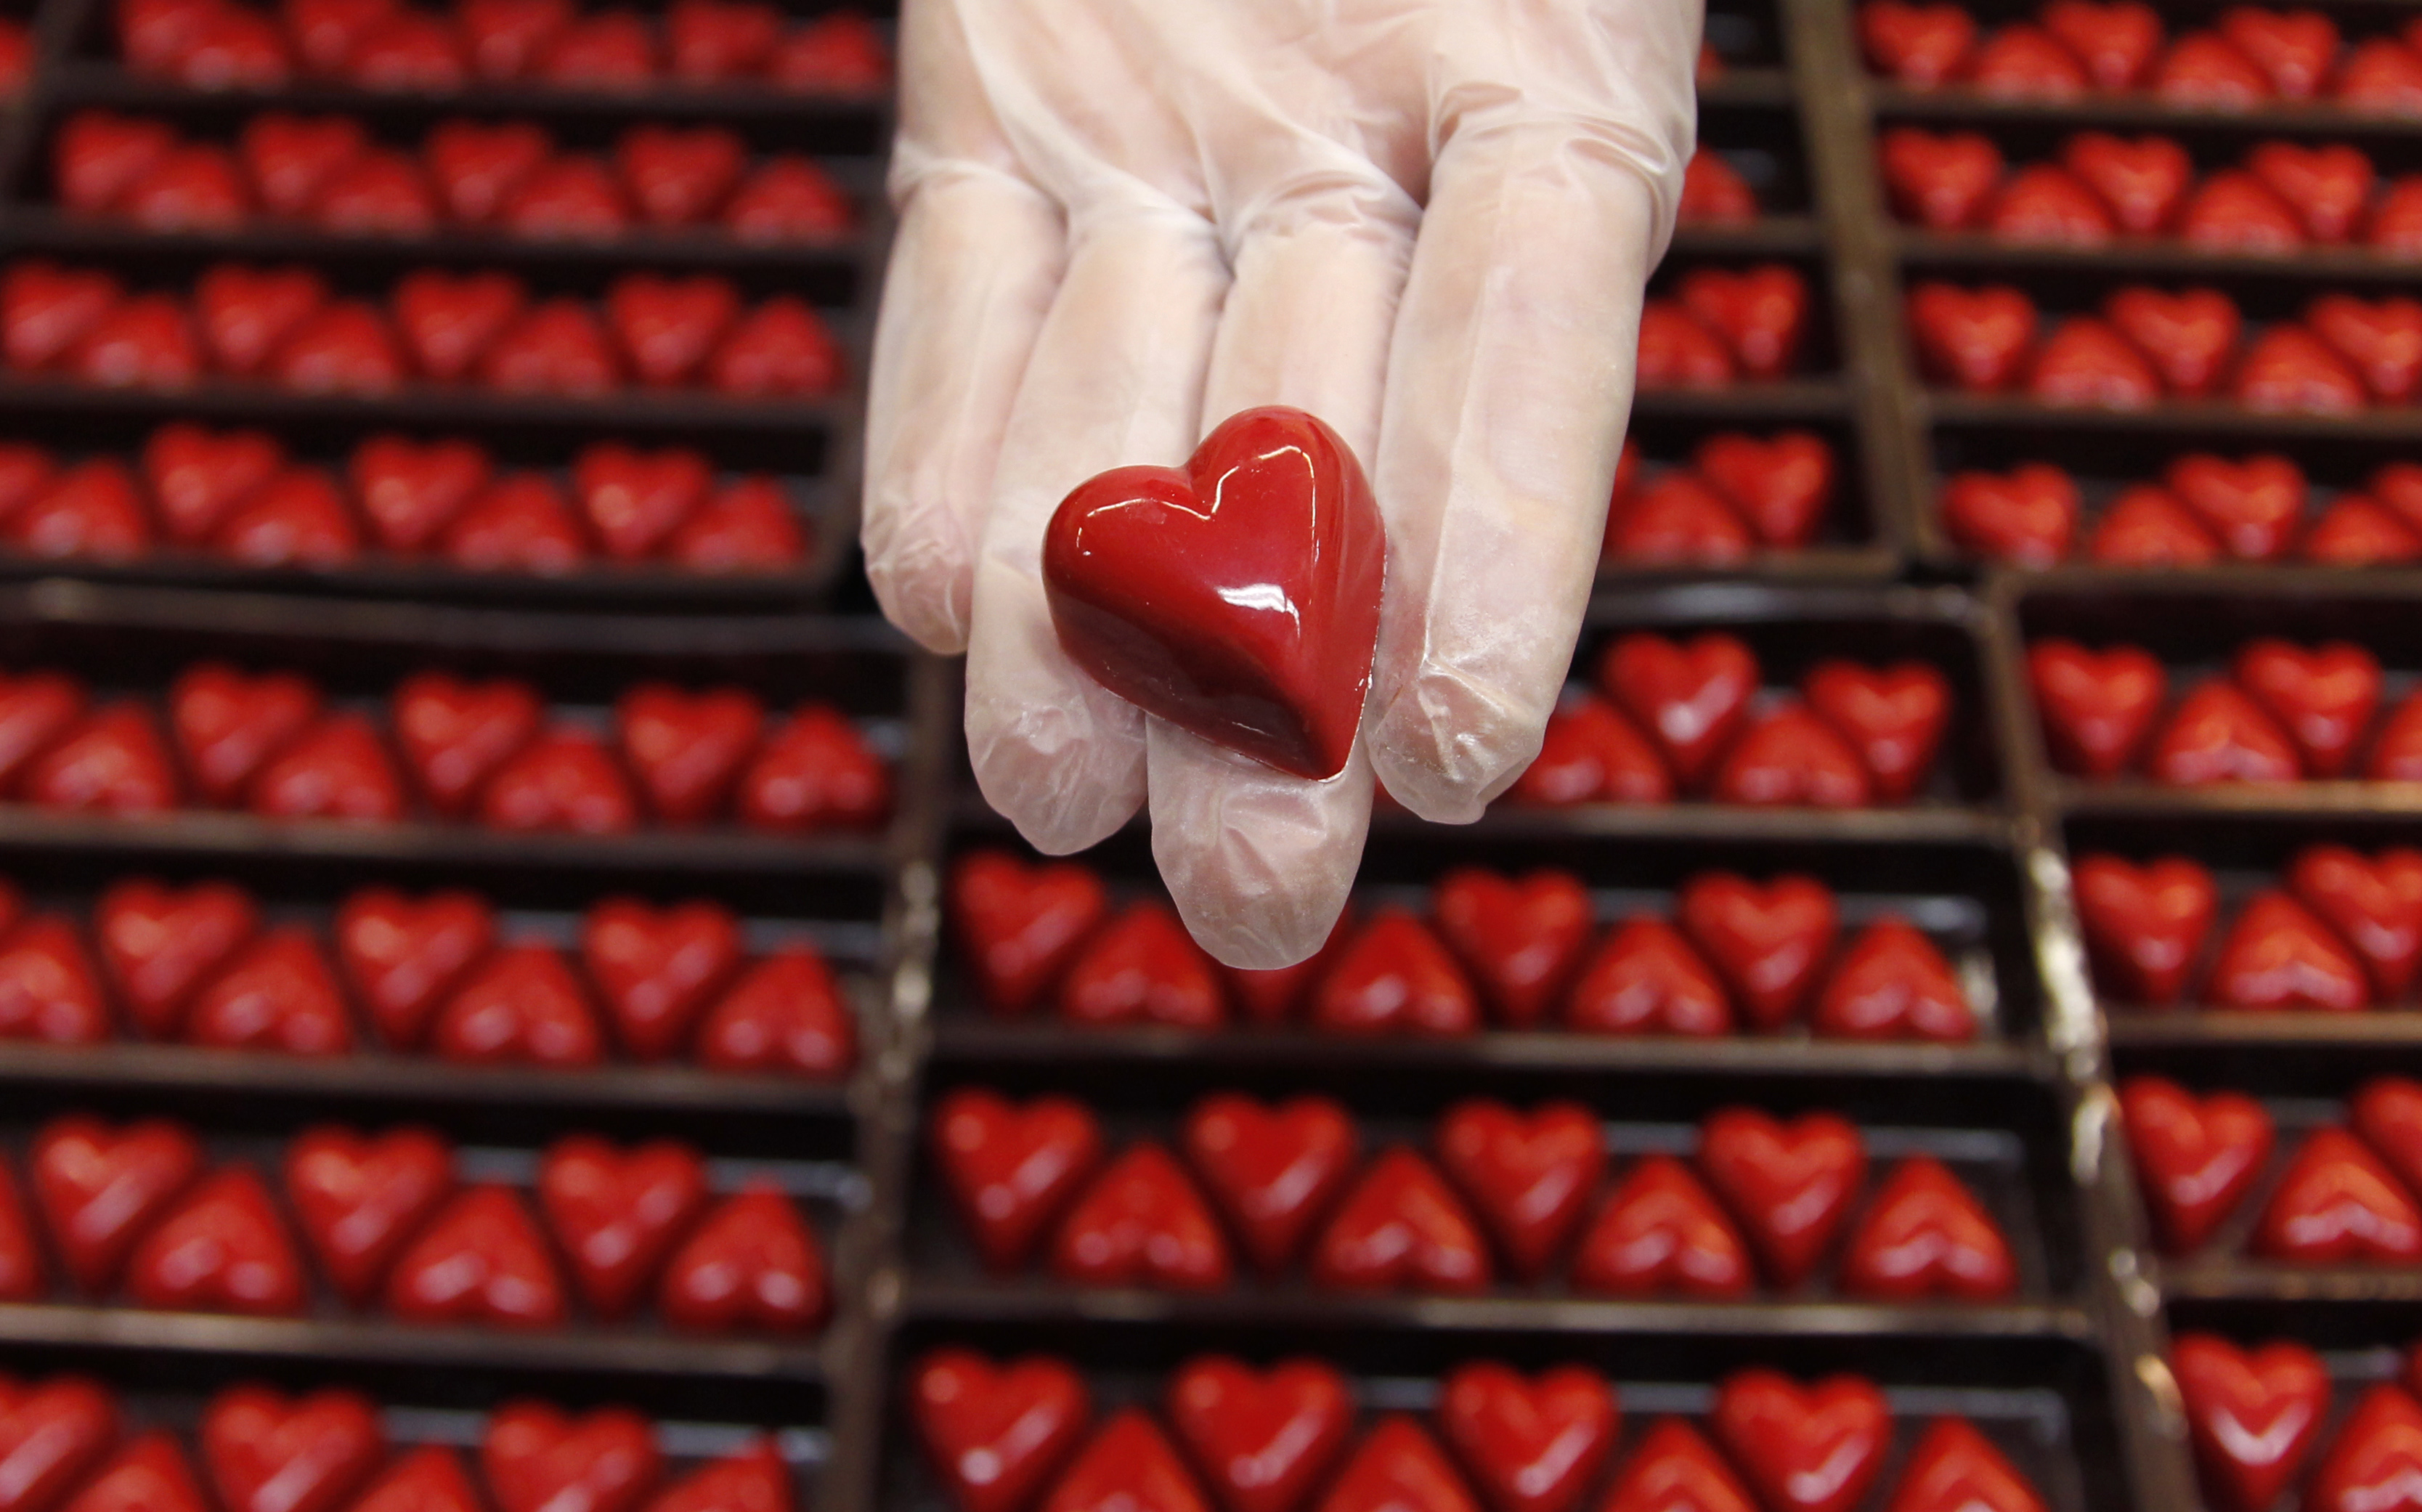 A worker displays a heart-shaped praline for Valentine's Day at a Wittamer chocolate boutique in Brussels February 14, 2012. REUTERS/Francois Lenoir (BELGIUM - Tags: FOOD SOCIETY) - RTR2XTWN